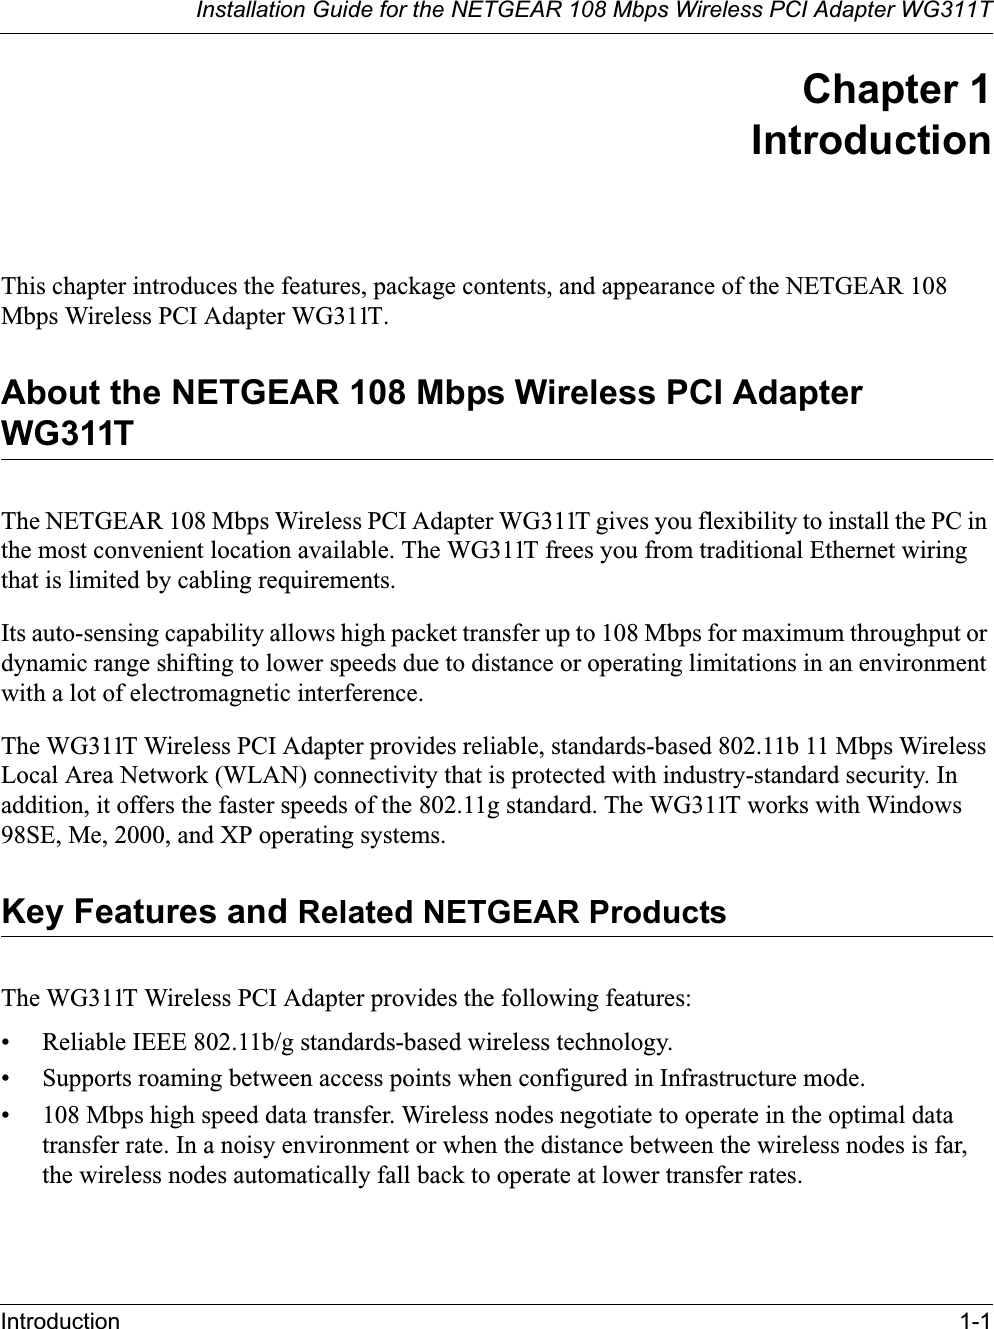 Installation Guide for the NETGEAR 108 Mbps Wireless PCI Adapter WG311TIntroduction 1-1Chapter 1IntroductionThis chapter introduces the features, package contents, and appearance of the NETGEAR 108 Mbps Wireless PCI Adapter WG311T.About the NETGEAR 108 Mbps Wireless PCI Adapter WG311TThe NETGEAR 108 Mbps Wireless PCI Adapter WG311T gives you flexibility to install the PC in the most convenient location available. The WG311T frees you from traditional Ethernet wiring that is limited by cabling requirements. Its auto-sensing capability allows high packet transfer up to 108 Mbps for maximum throughput or dynamic range shifting to lower speeds due to distance or operating limitations in an environment with a lot of electromagnetic interference.The WG311T Wireless PCI Adapter provides reliable, standards-based 802.11b 11 Mbps Wireless Local Area Network (WLAN) connectivity that is protected with industry-standard security. In addition, it offers the faster speeds of the 802.11g standard. The WG311T works with Windows 98SE, Me, 2000, and XP operating systems.Key Features and Related NETGEAR ProductsThe WG311T Wireless PCI Adapter provides the following features:• Reliable IEEE 802.11b/g standards-based wireless technology.• Supports roaming between access points when configured in Infrastructure mode.• 108 Mbps high speed data transfer. Wireless nodes negotiate to operate in the optimal data transfer rate. In a noisy environment or when the distance between the wireless nodes is far, the wireless nodes automatically fall back to operate at lower transfer rates.